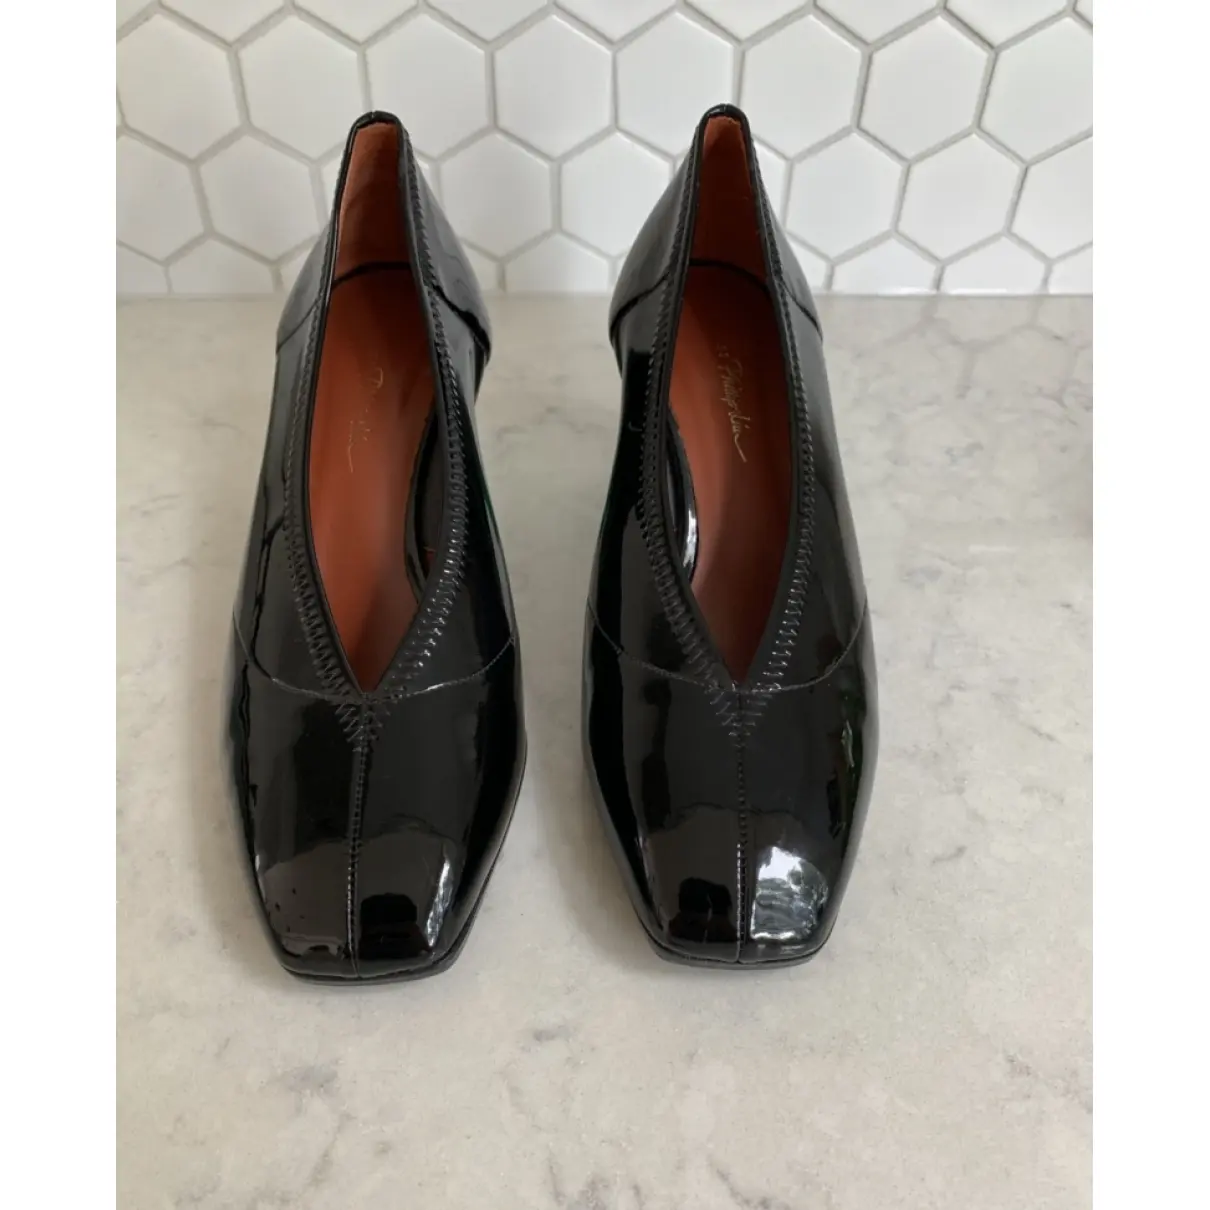 3.1 Phillip Lim Patent leather heels for sale